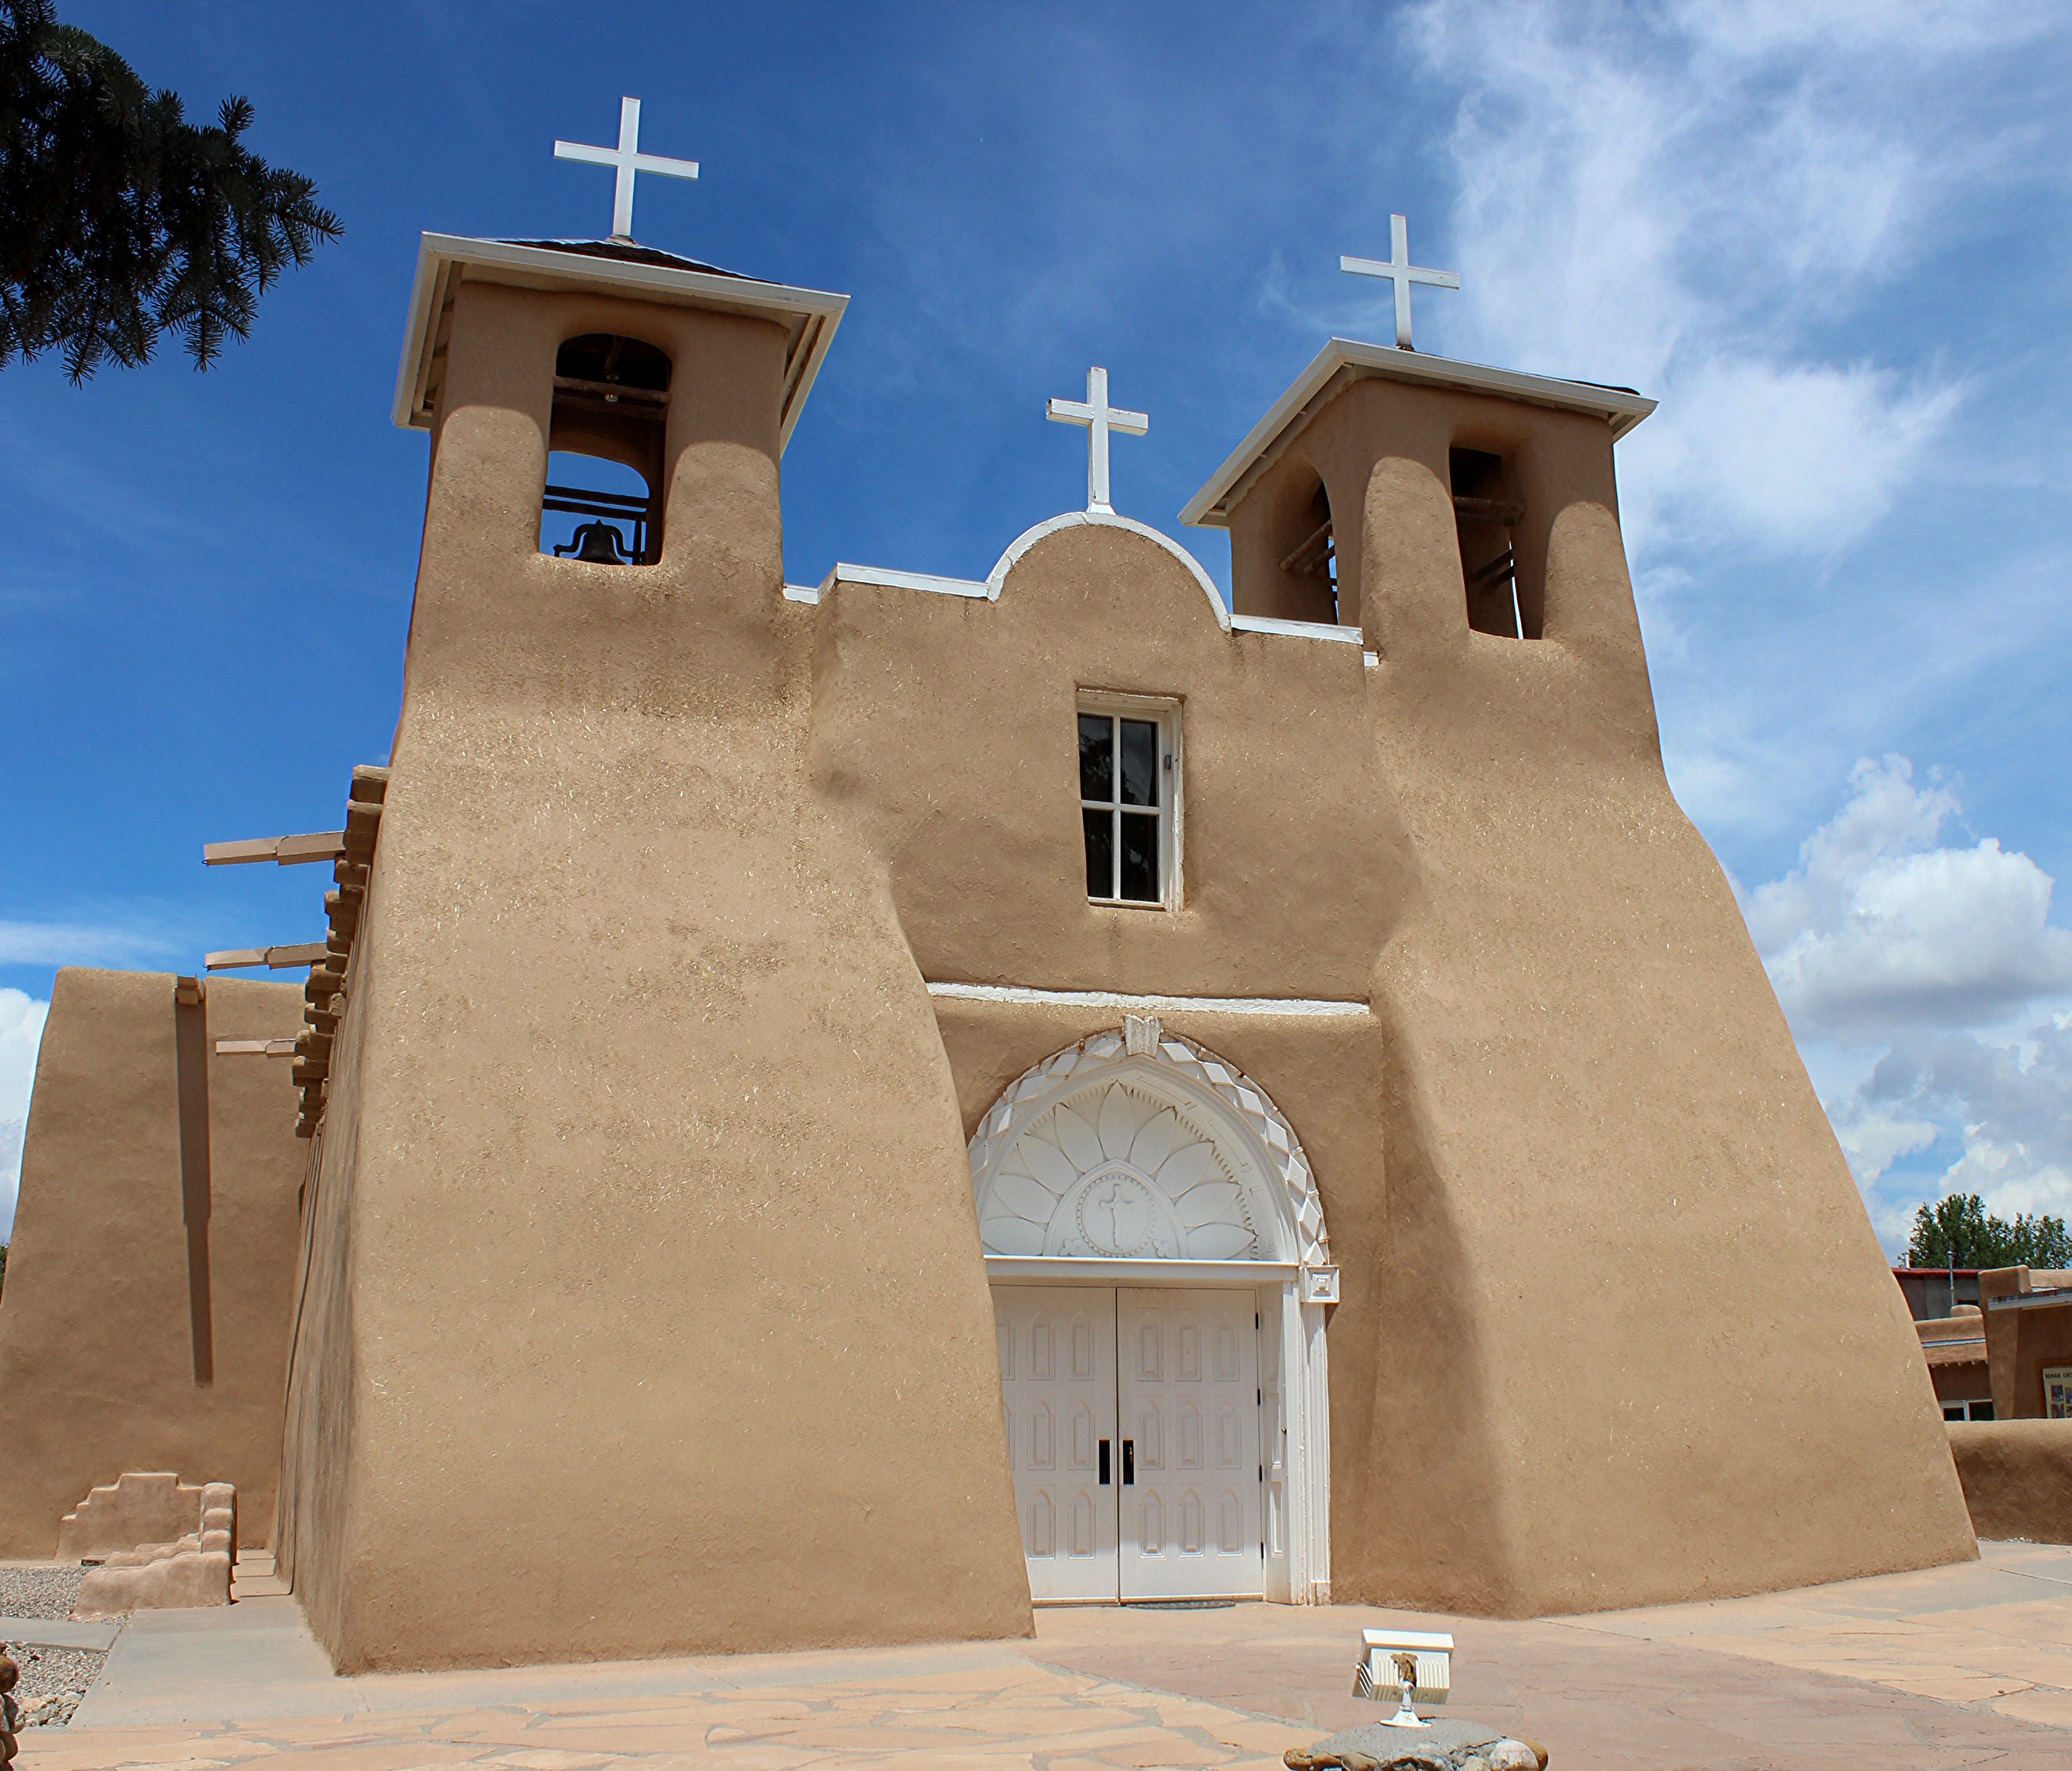 San Francisco de Asis Mission Church, 1816 (Architect: Spanish Colonial Franciscan Priests): Completed in 1816, the San Francisco de Asis Mission Church in Ranchos de Taos is a large, sculpted Spanish Colonial church with massive adobe buttresses and